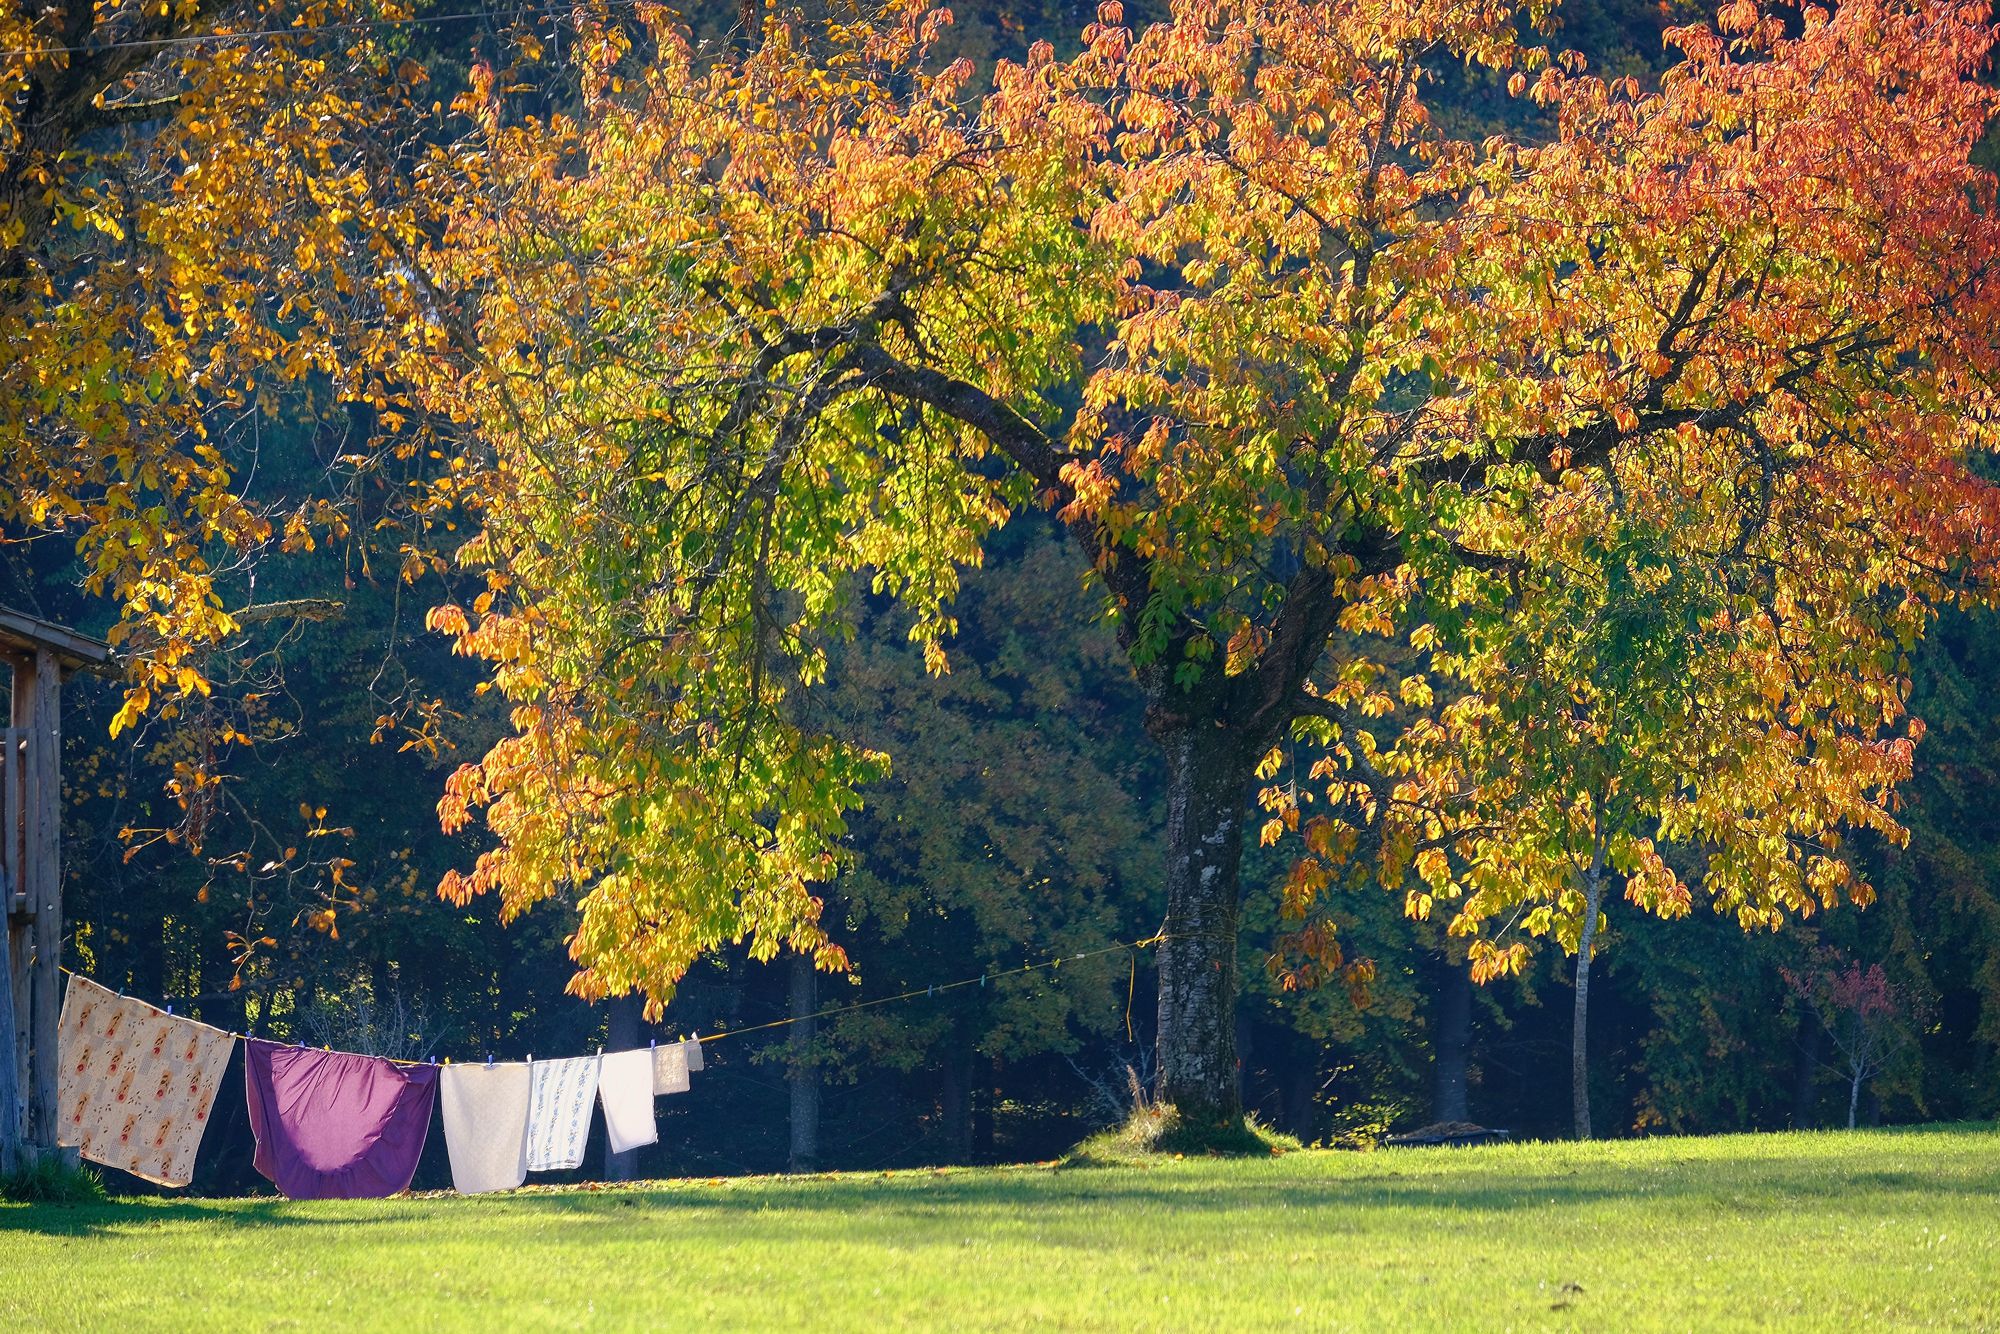 Clothesline hanging from a tree with clothes drying on it